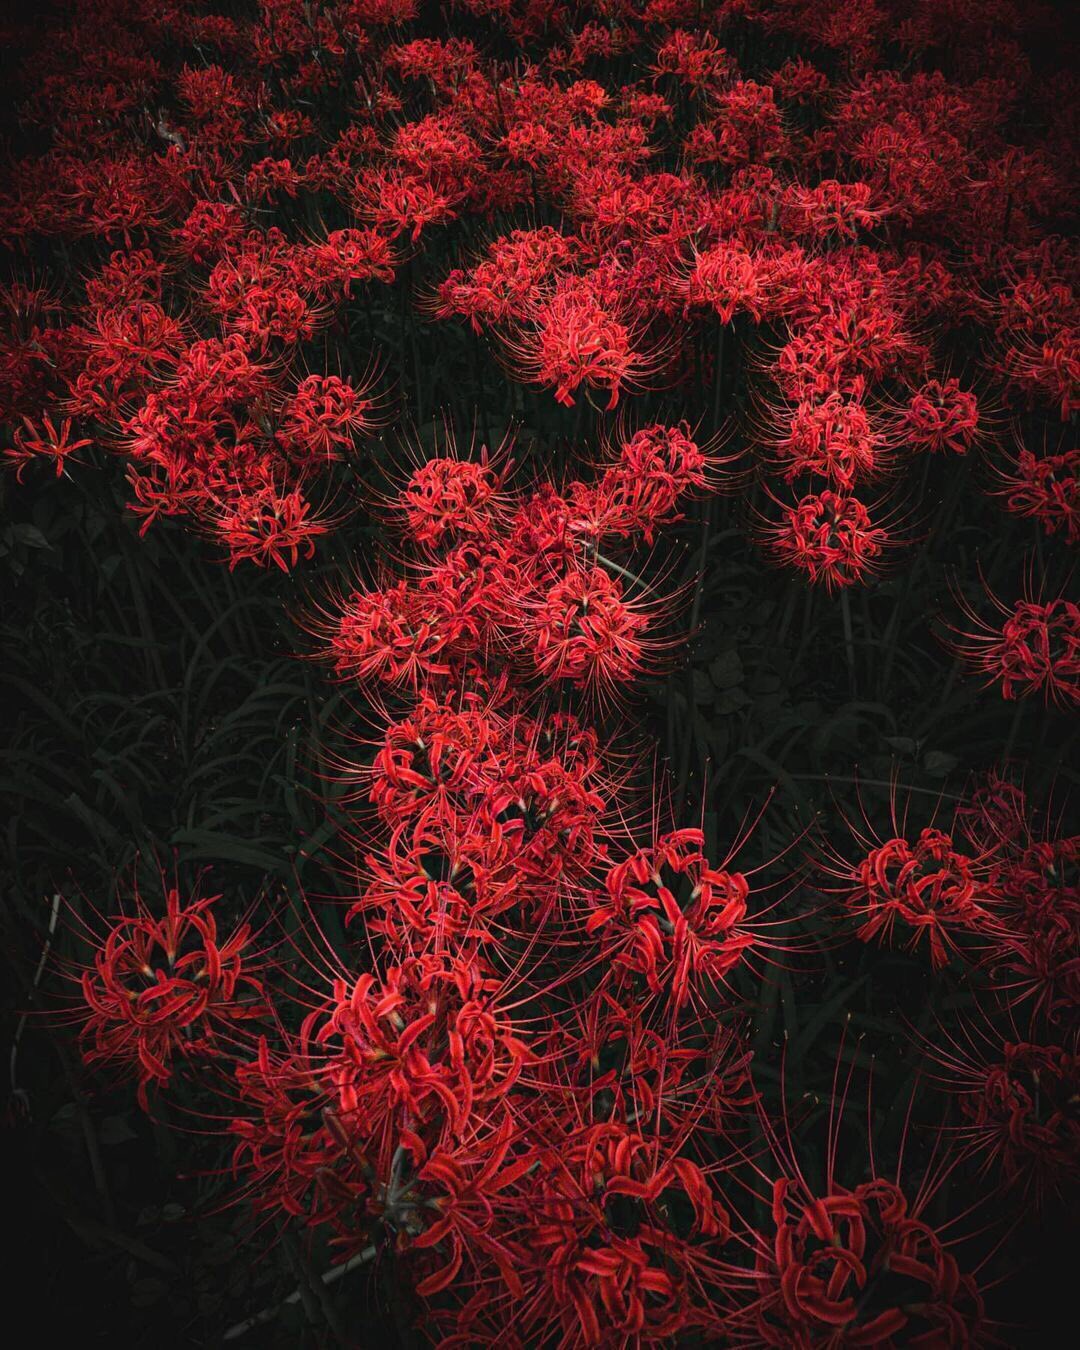 Red spider lily Stock Photos Royalty Free Red spider lily Images   Depositphotos